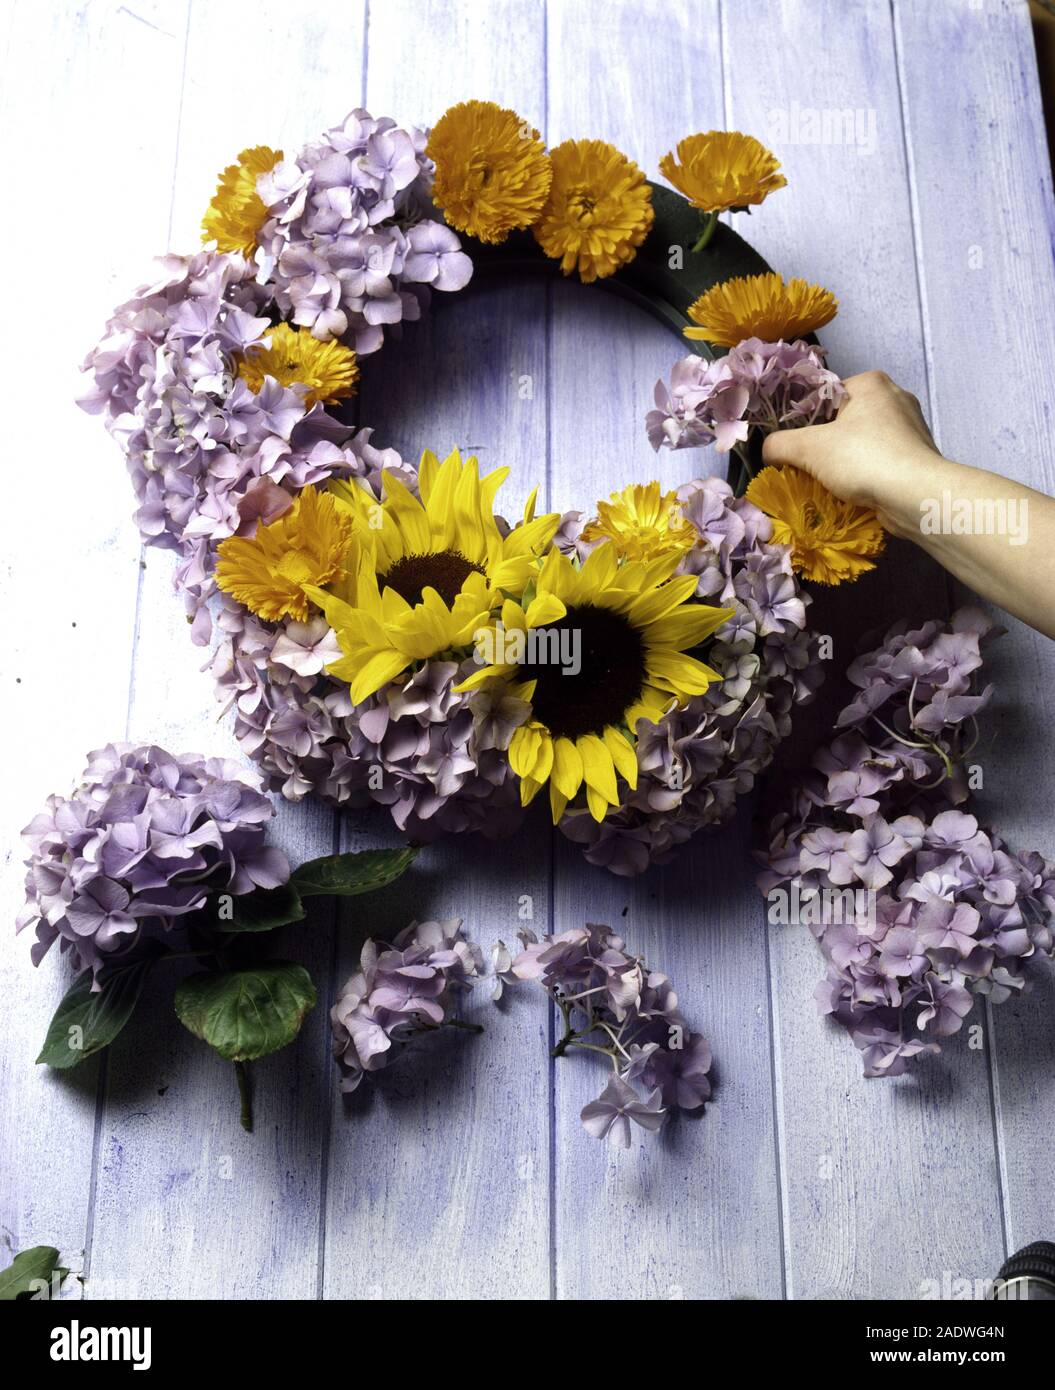 Close-up of hands attaching sunflowers and mauve hydrangeas to an oasis ring Stock Photo